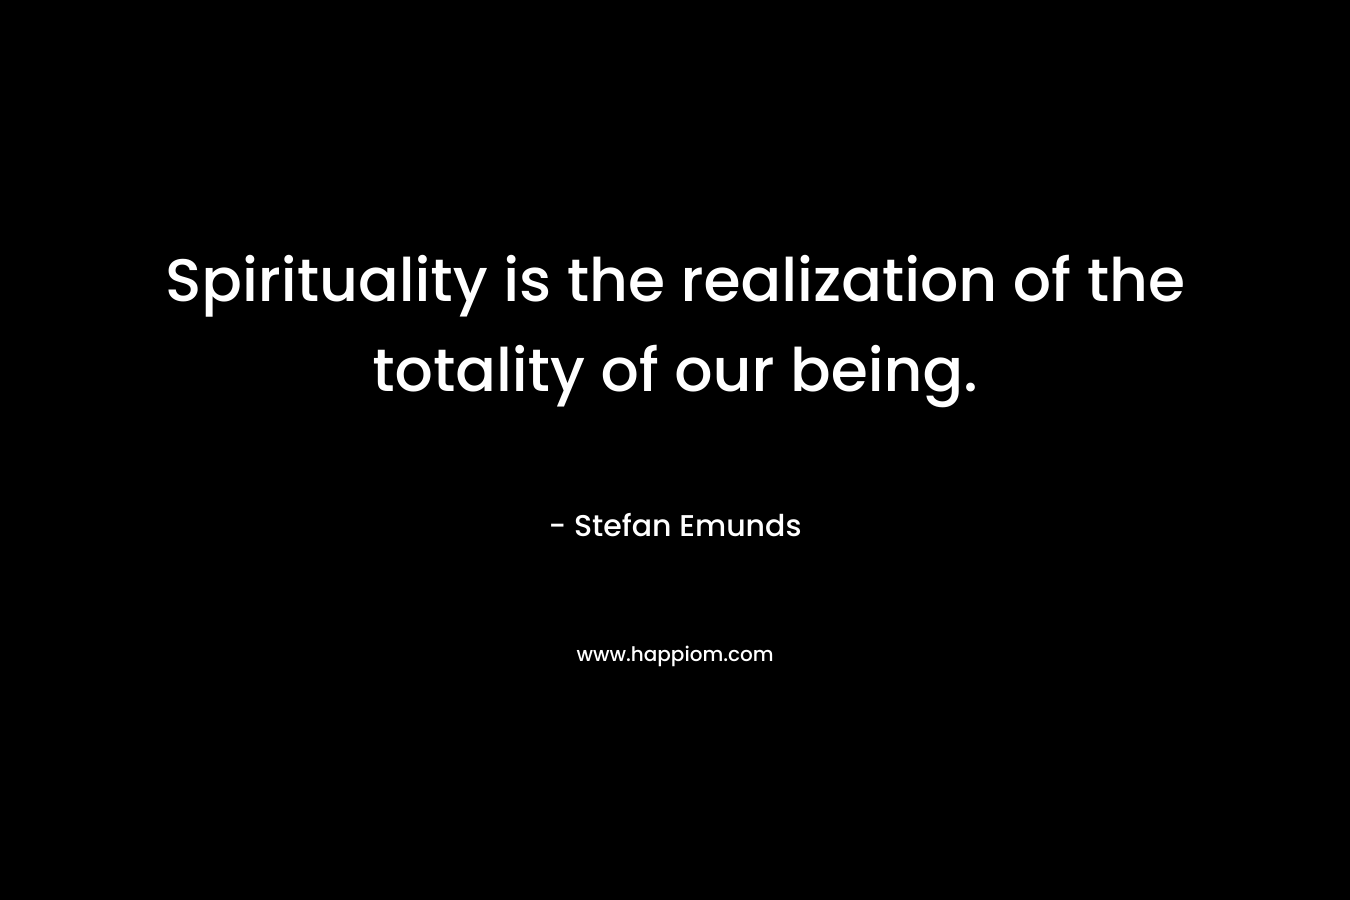 Spirituality is the realization of the totality of our being.